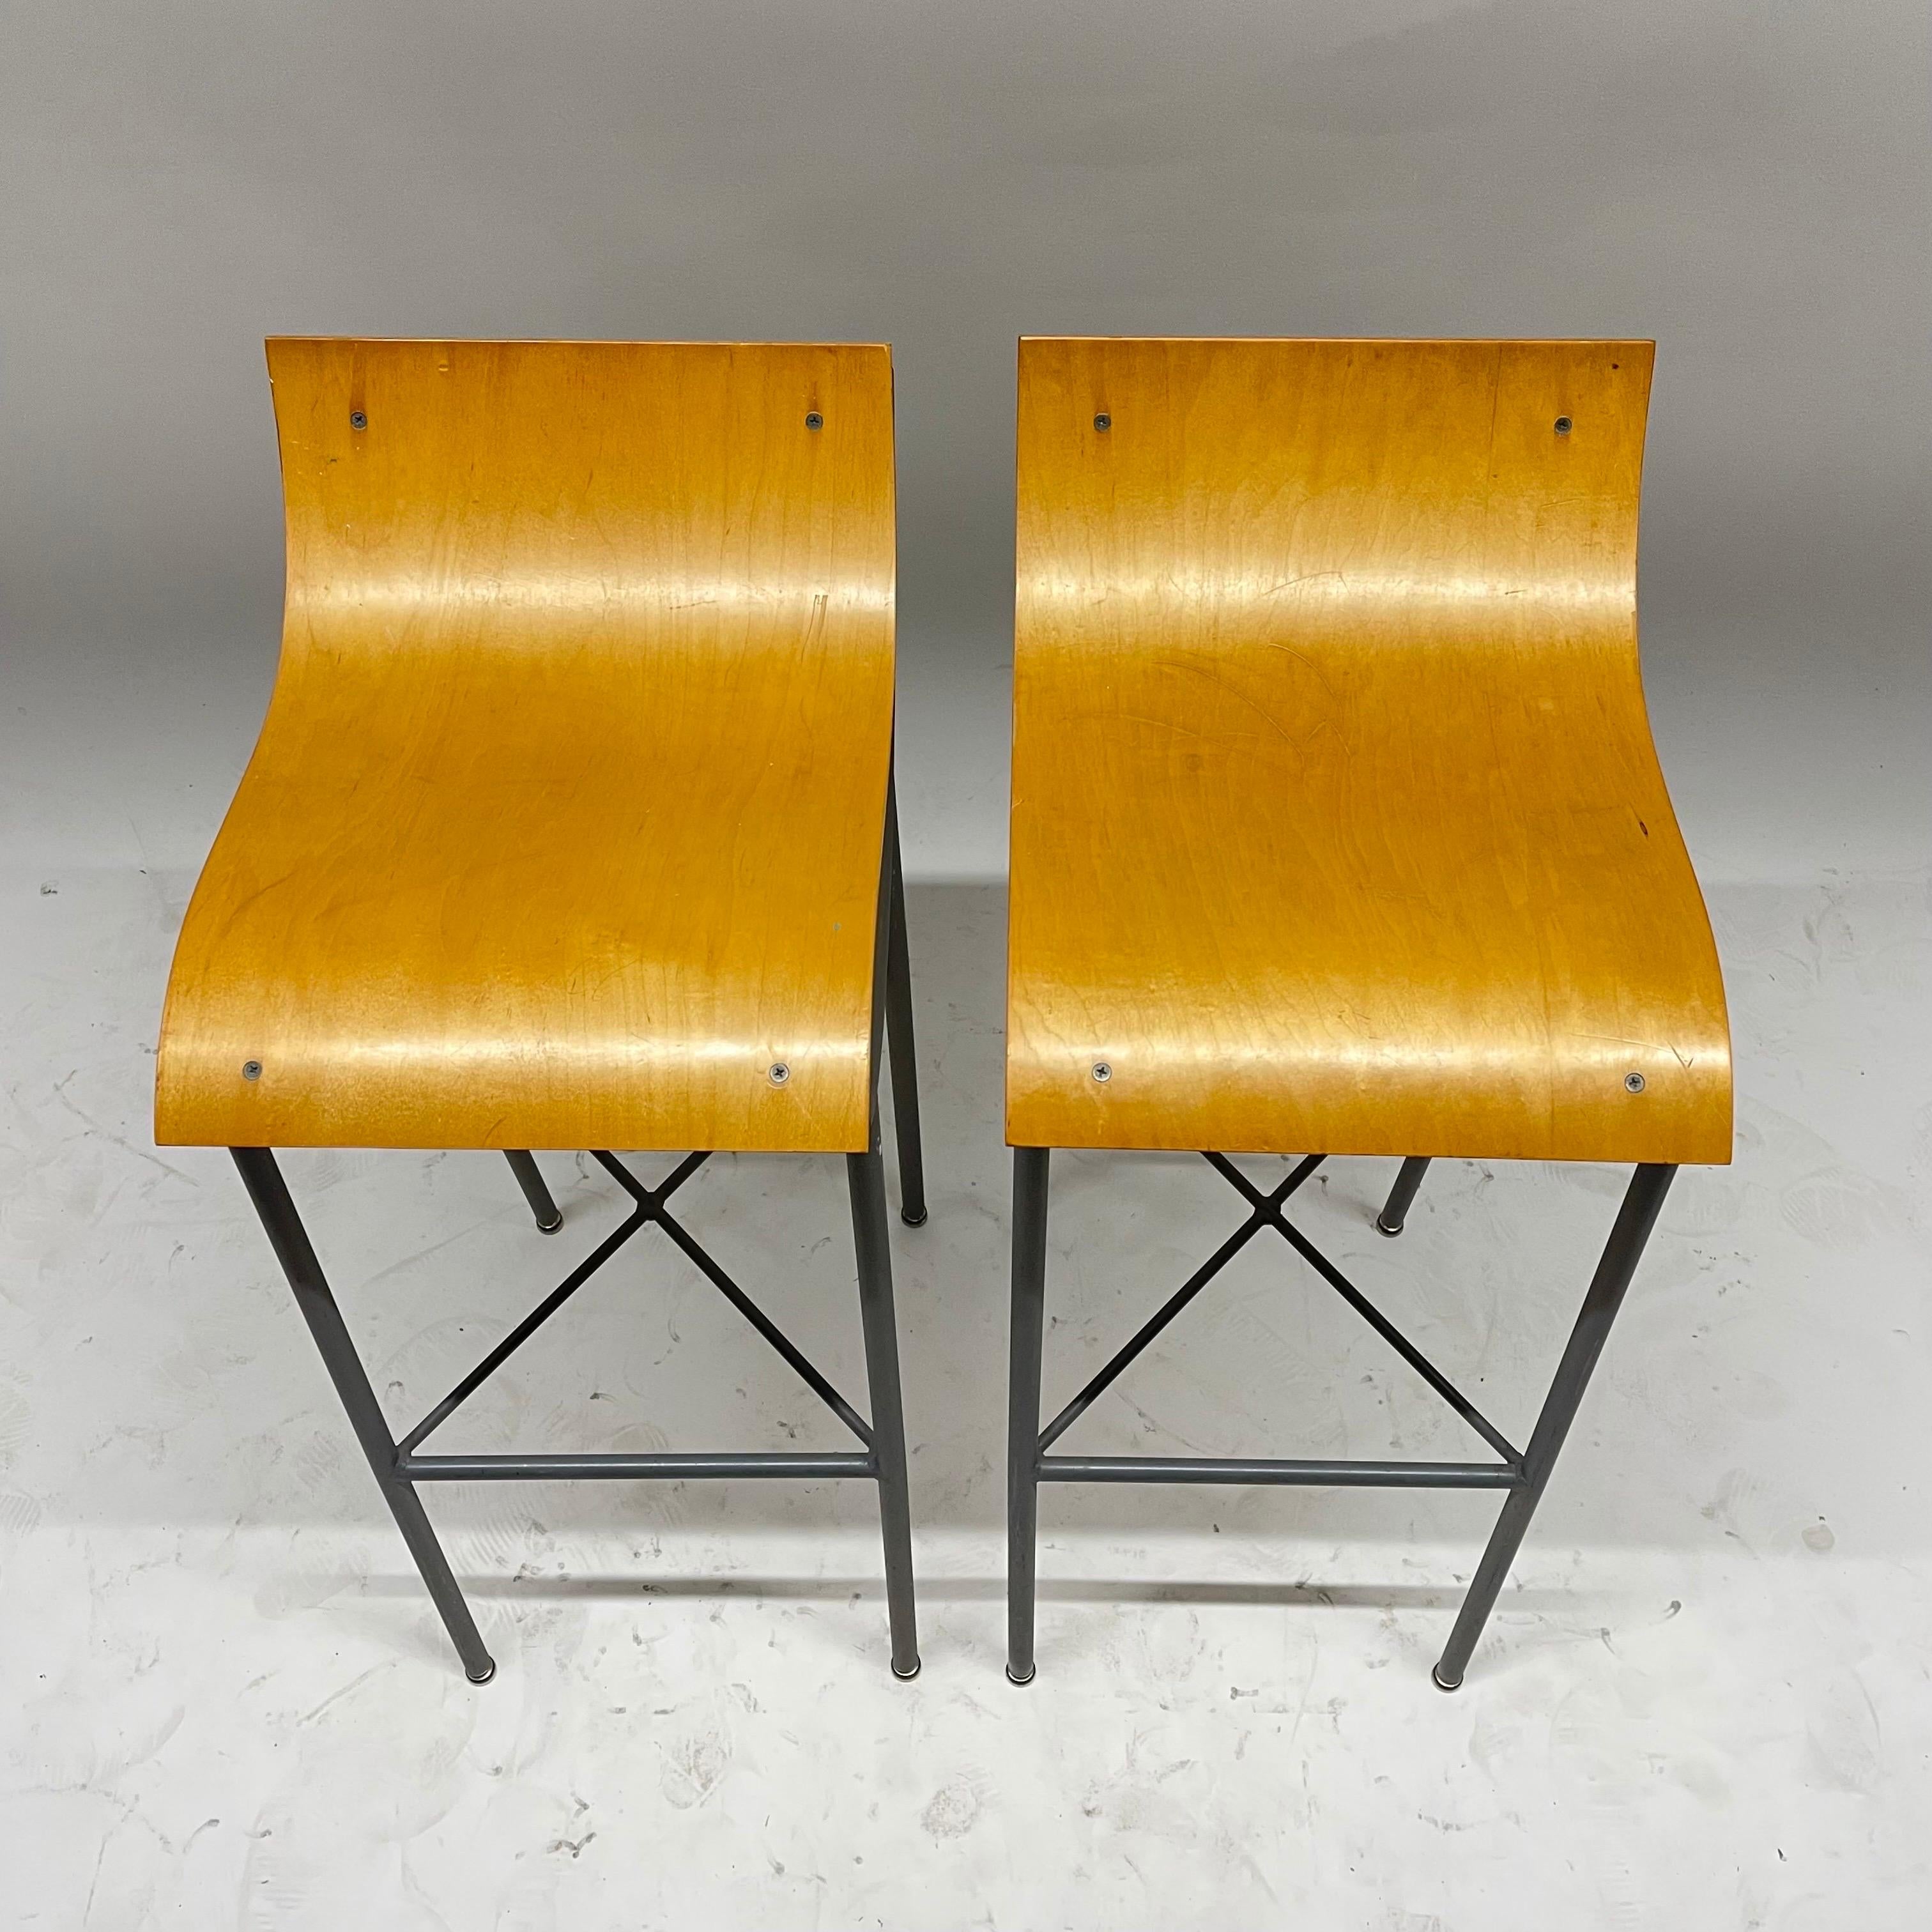 Pair of Post Modern Sculptural Steel and Bent Plywood Bar Stools, circa 1980s For Sale 1